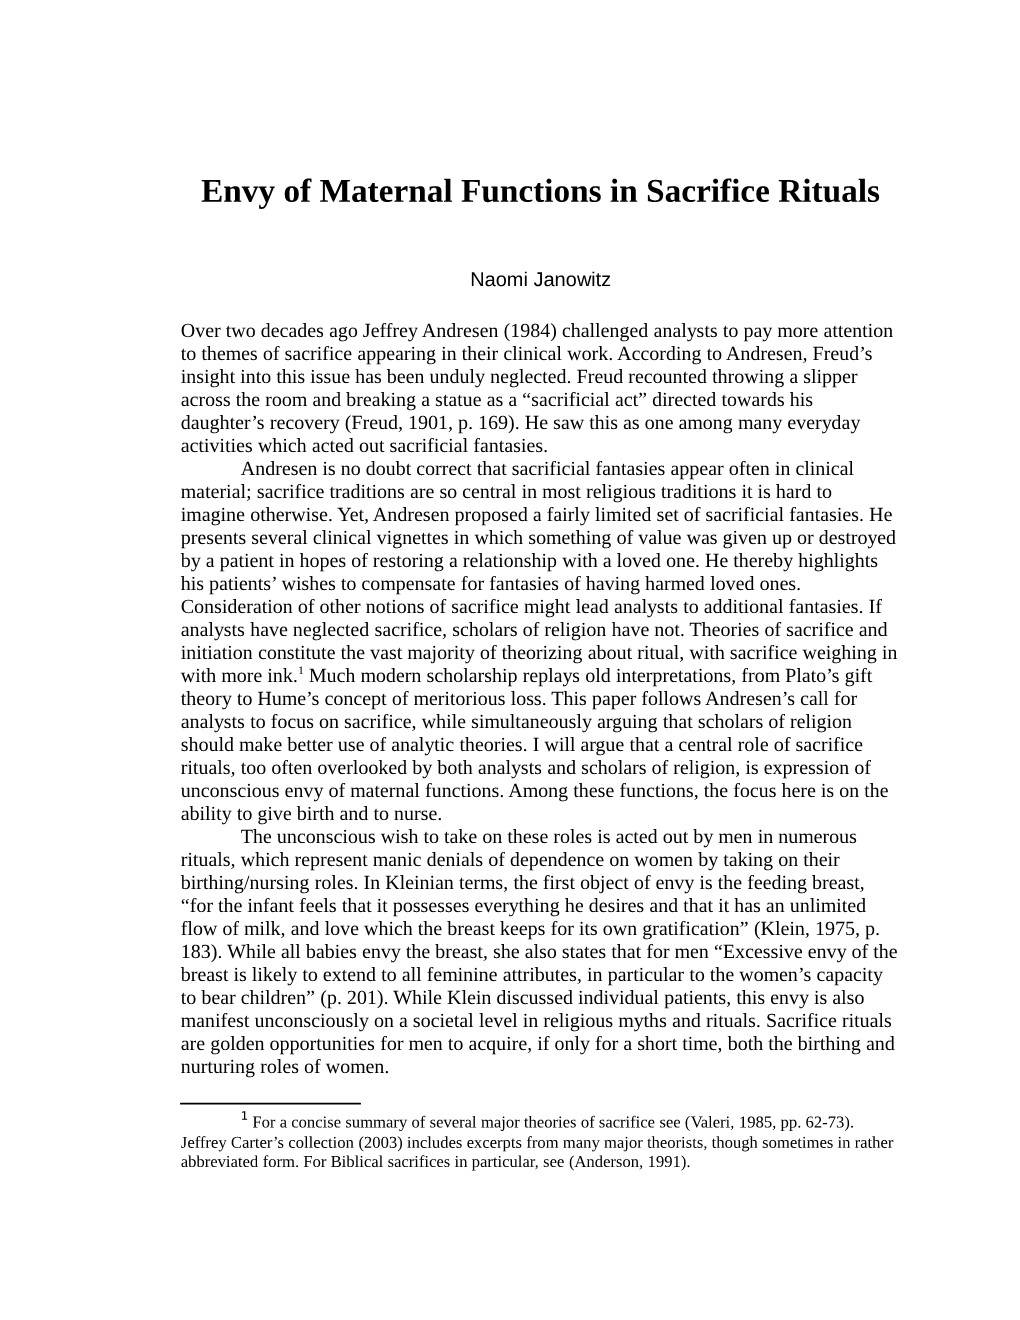 Envy of Maternal Functions in Sacrifice and Initiation Rituals